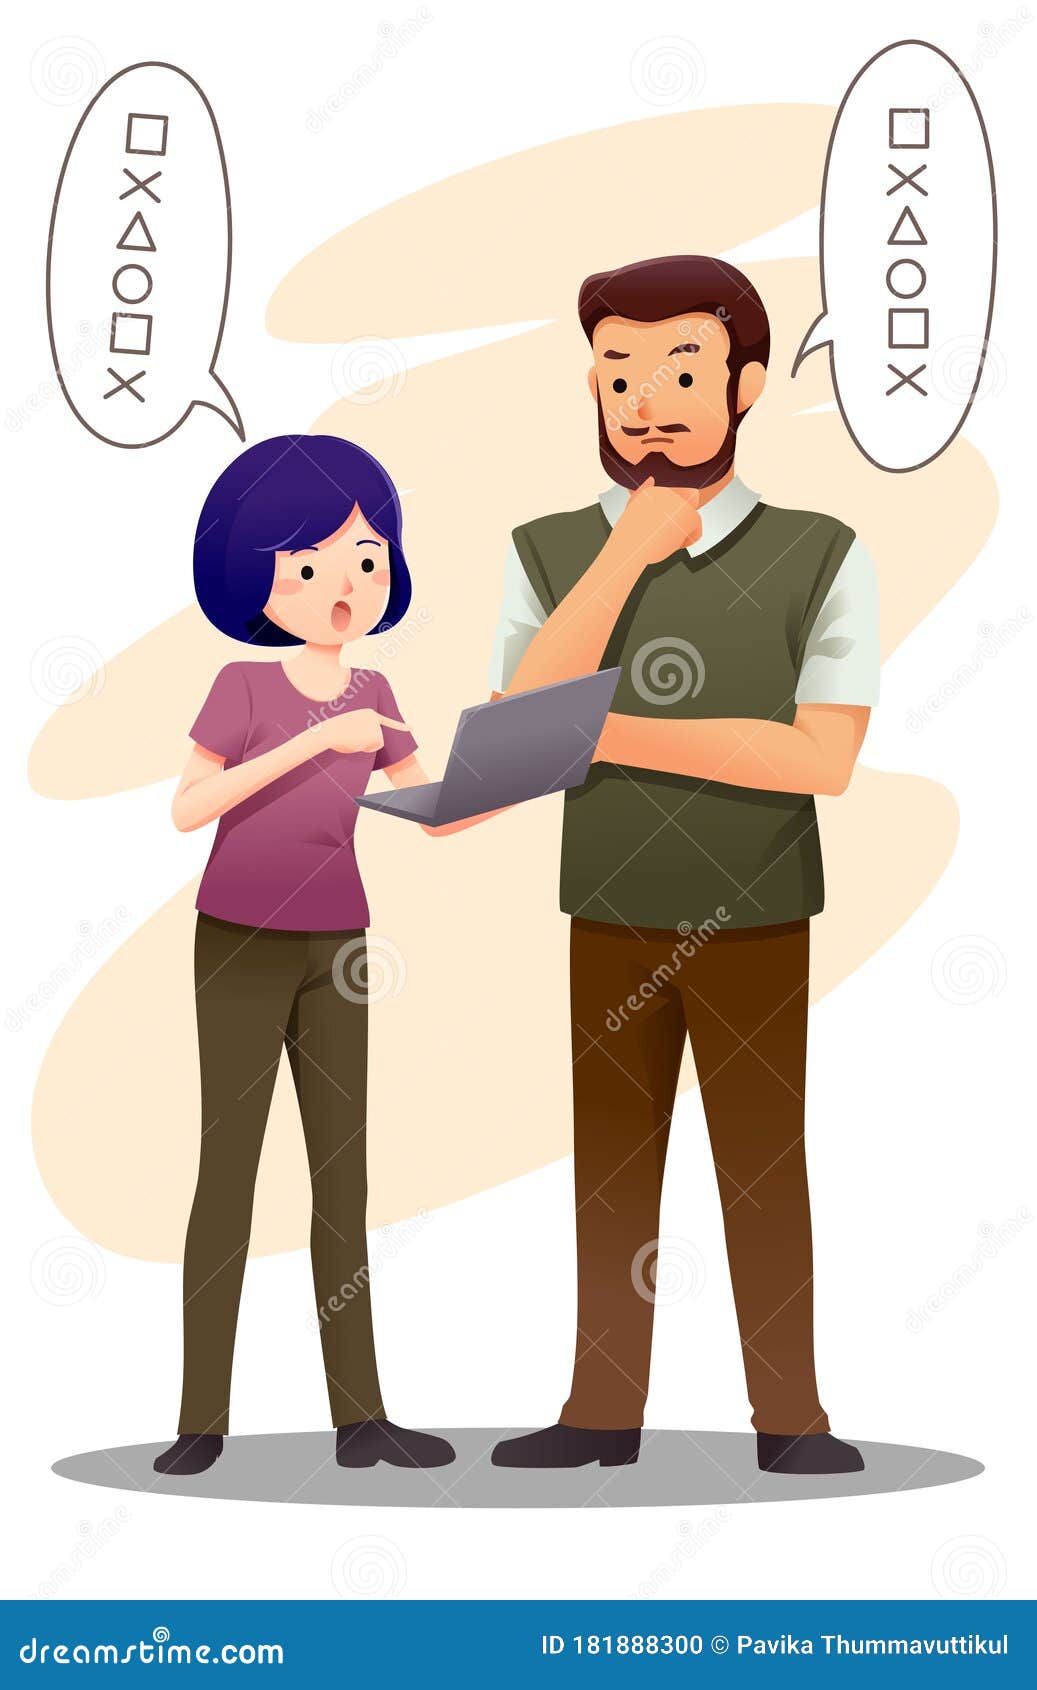 Two People Discuss Work Together Stock Vector - Illustration of clipart,  design: 181888300